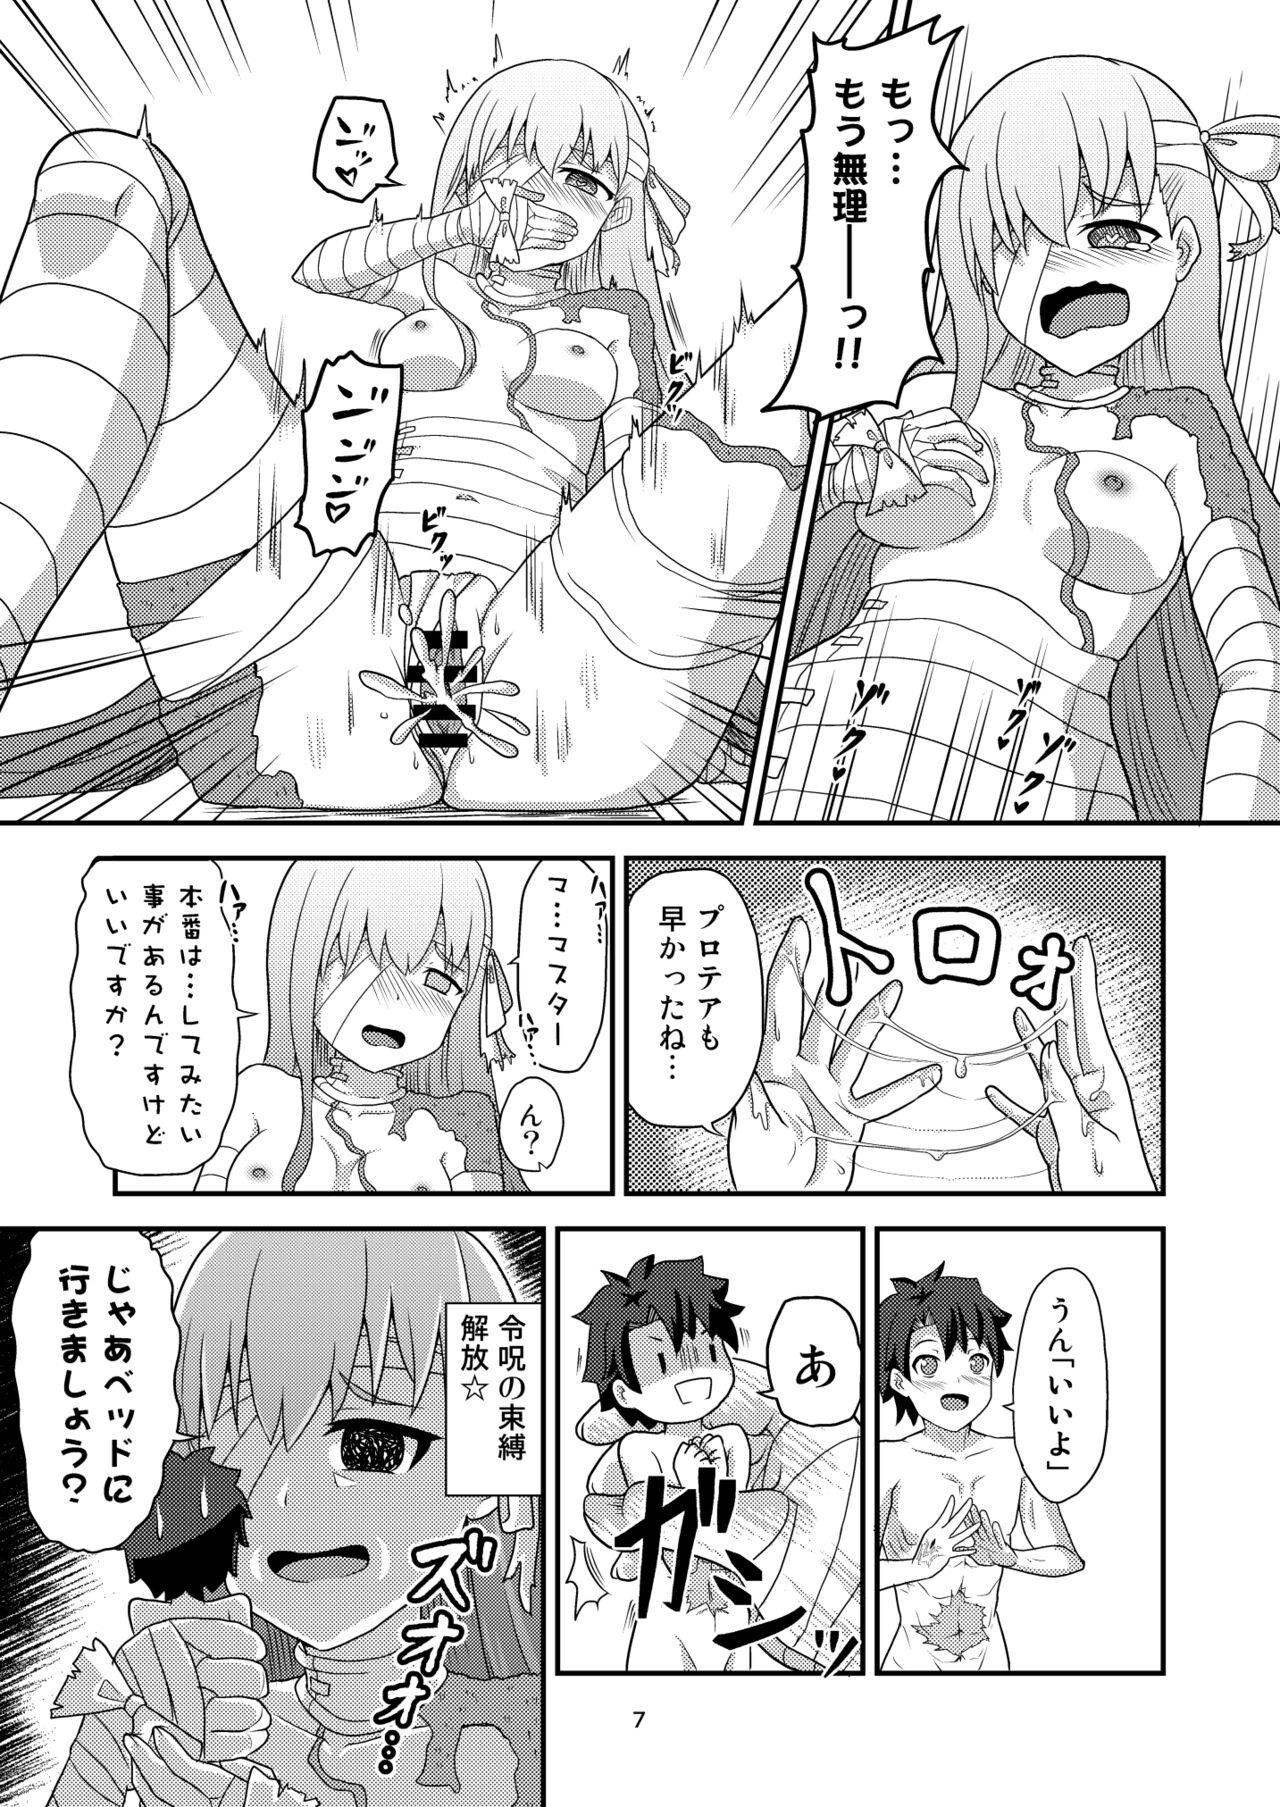 Ametuer Porn Hな私をゆるしてください - Fate grand order Toy - Page 8